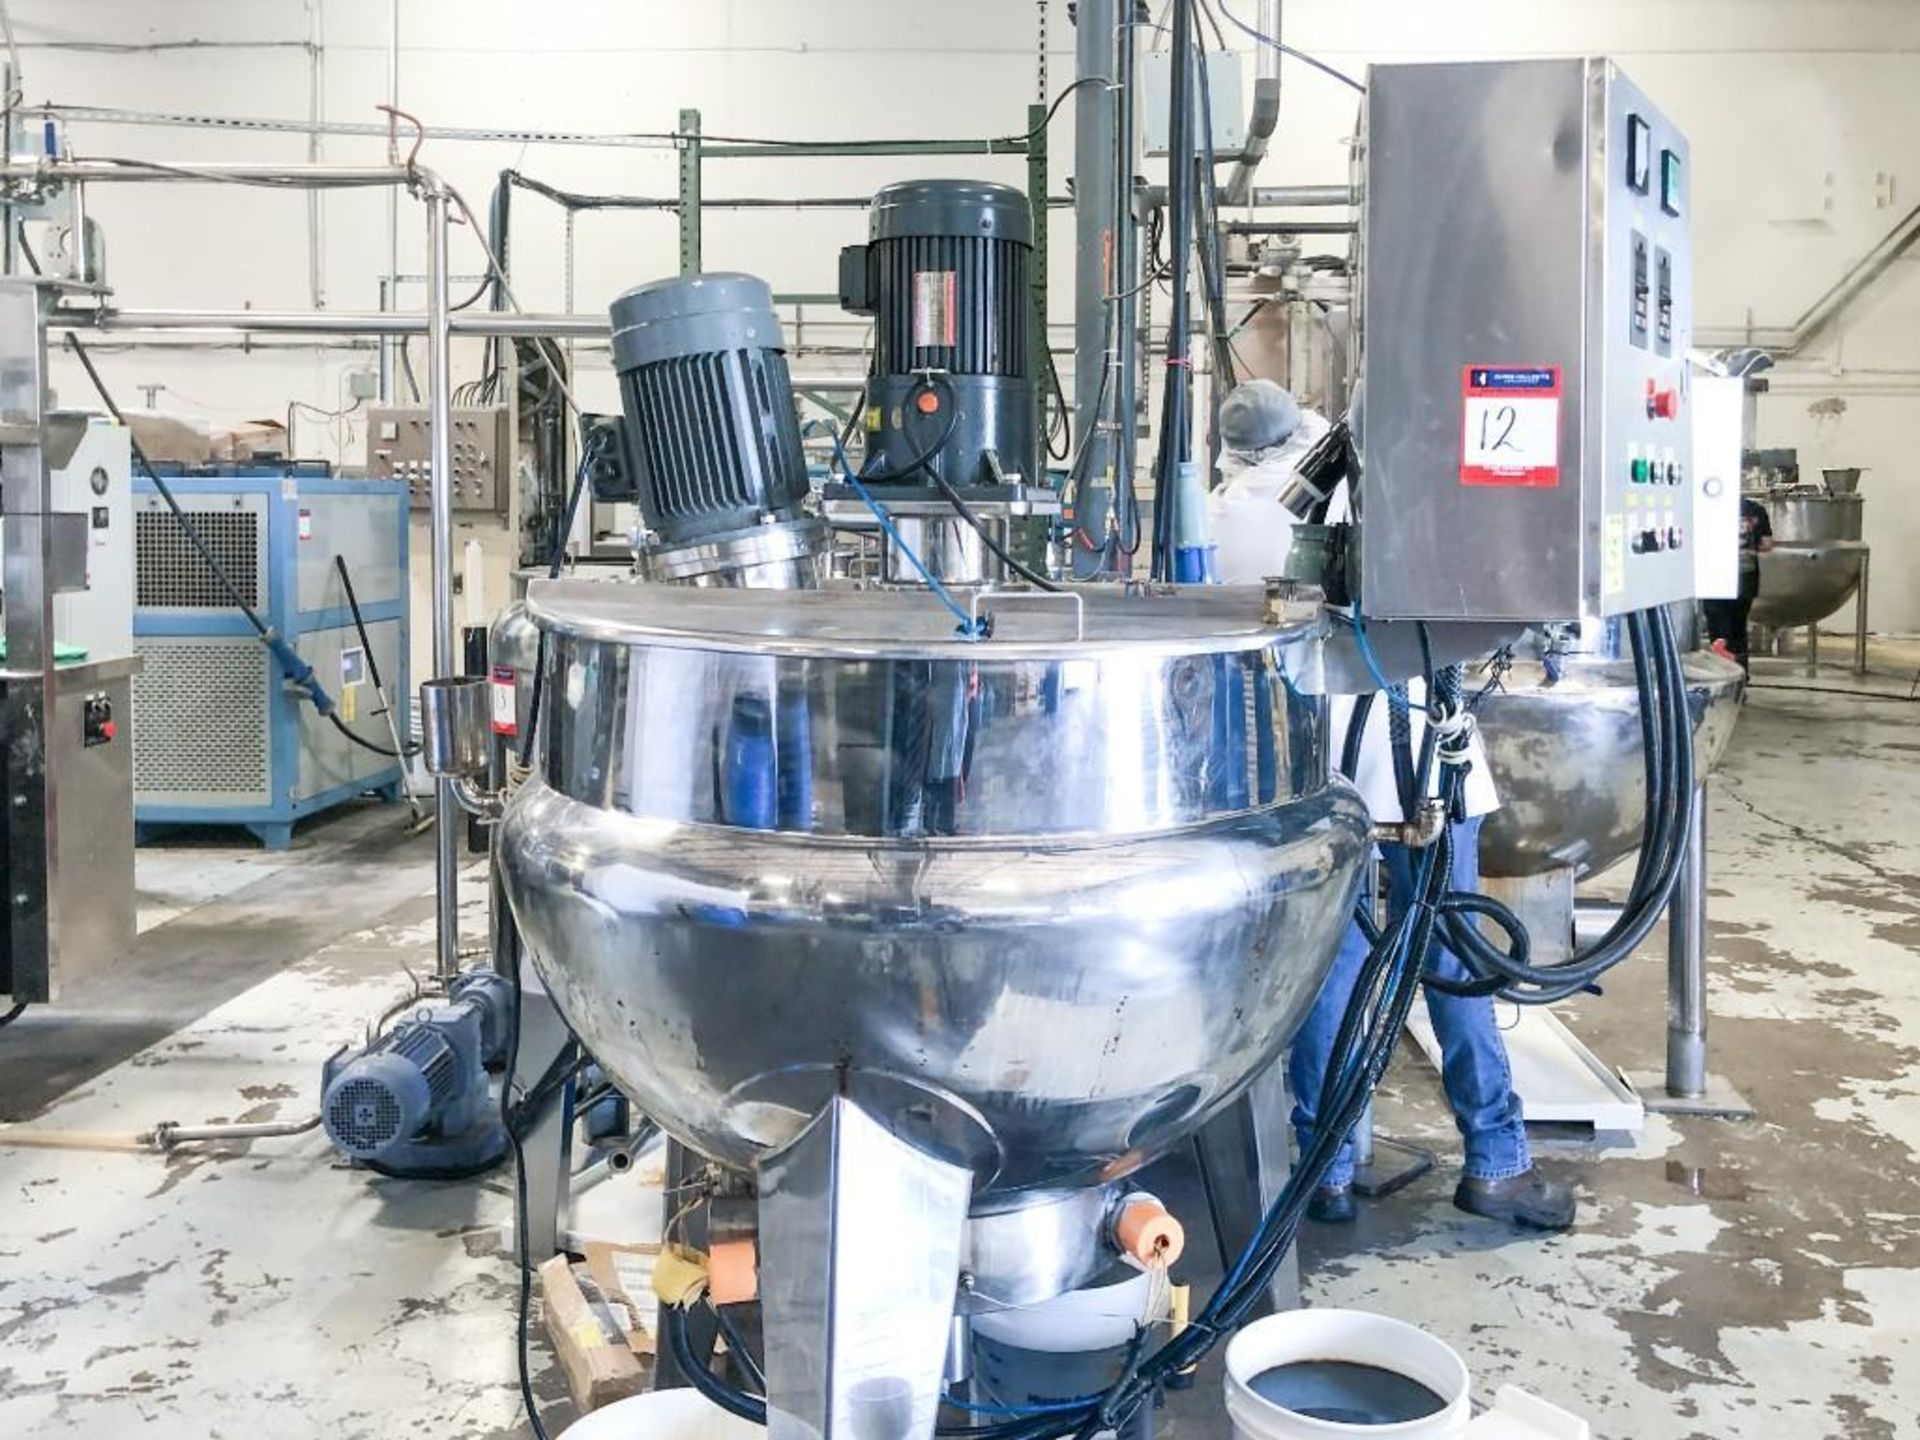 Full Sweep Mixing Kettle 400L - Image 2 of 5